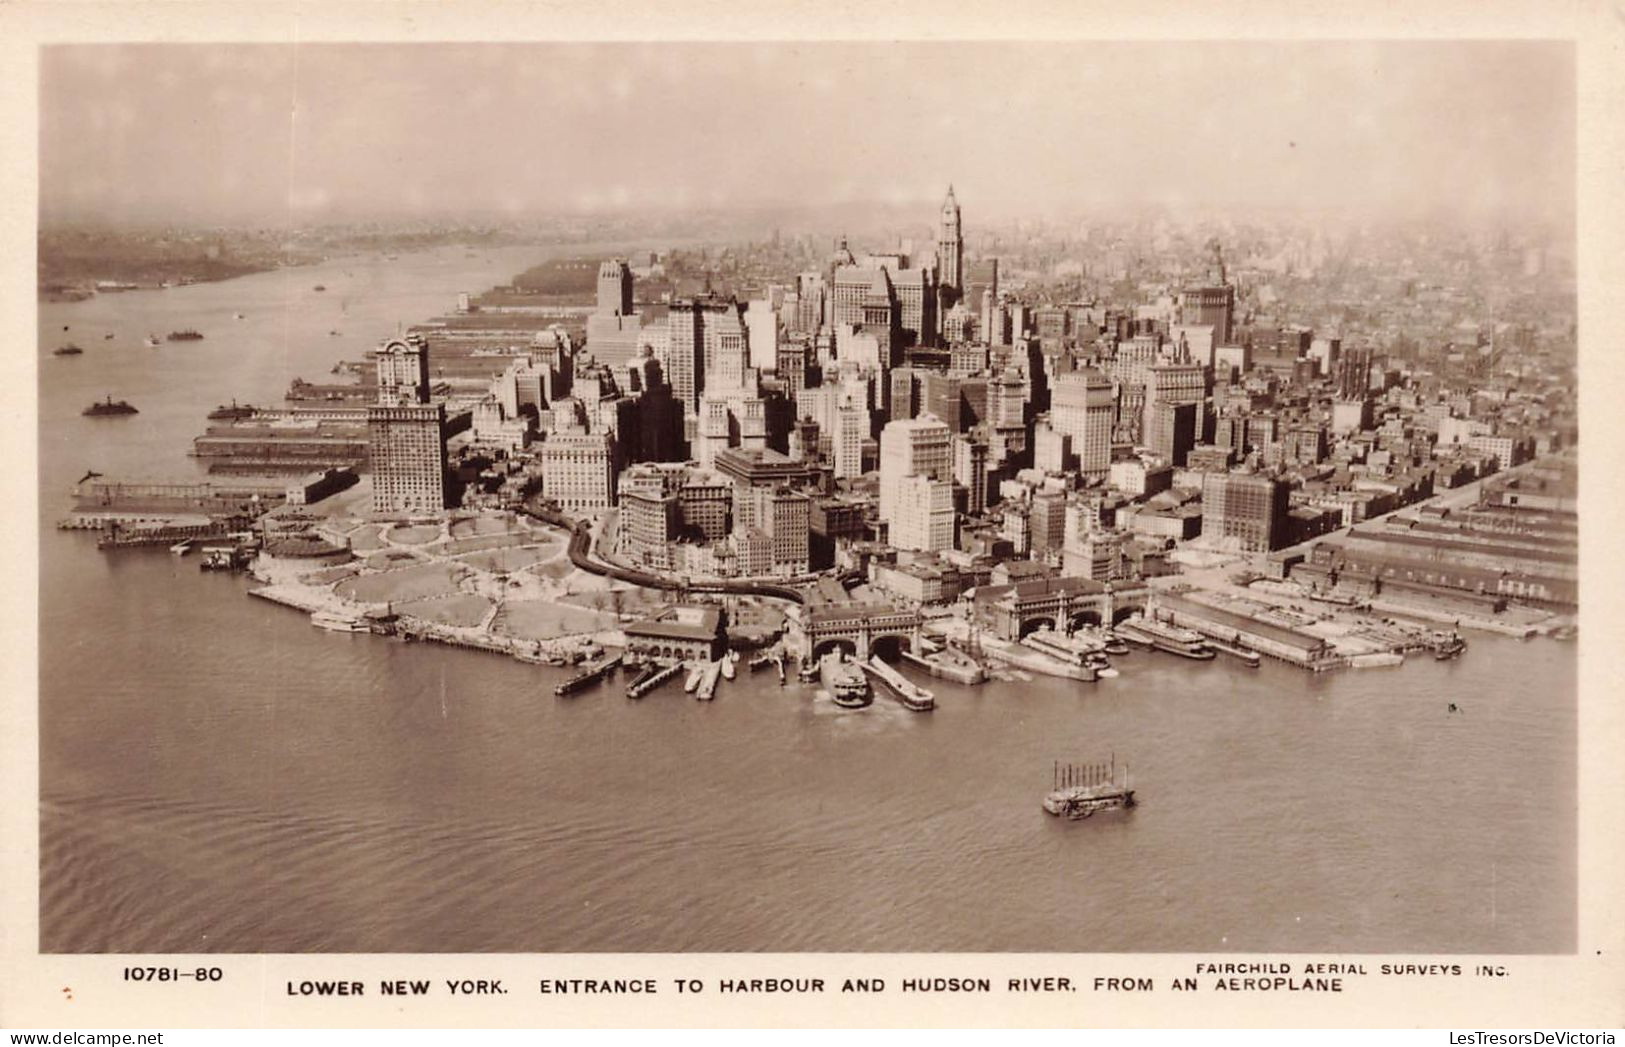 ETATS-UNIS - Lower New York - Entrance To Harbour And Hudson River From An Aeroplane - Carte Postale Ancienne - Andere Monumente & Gebäude